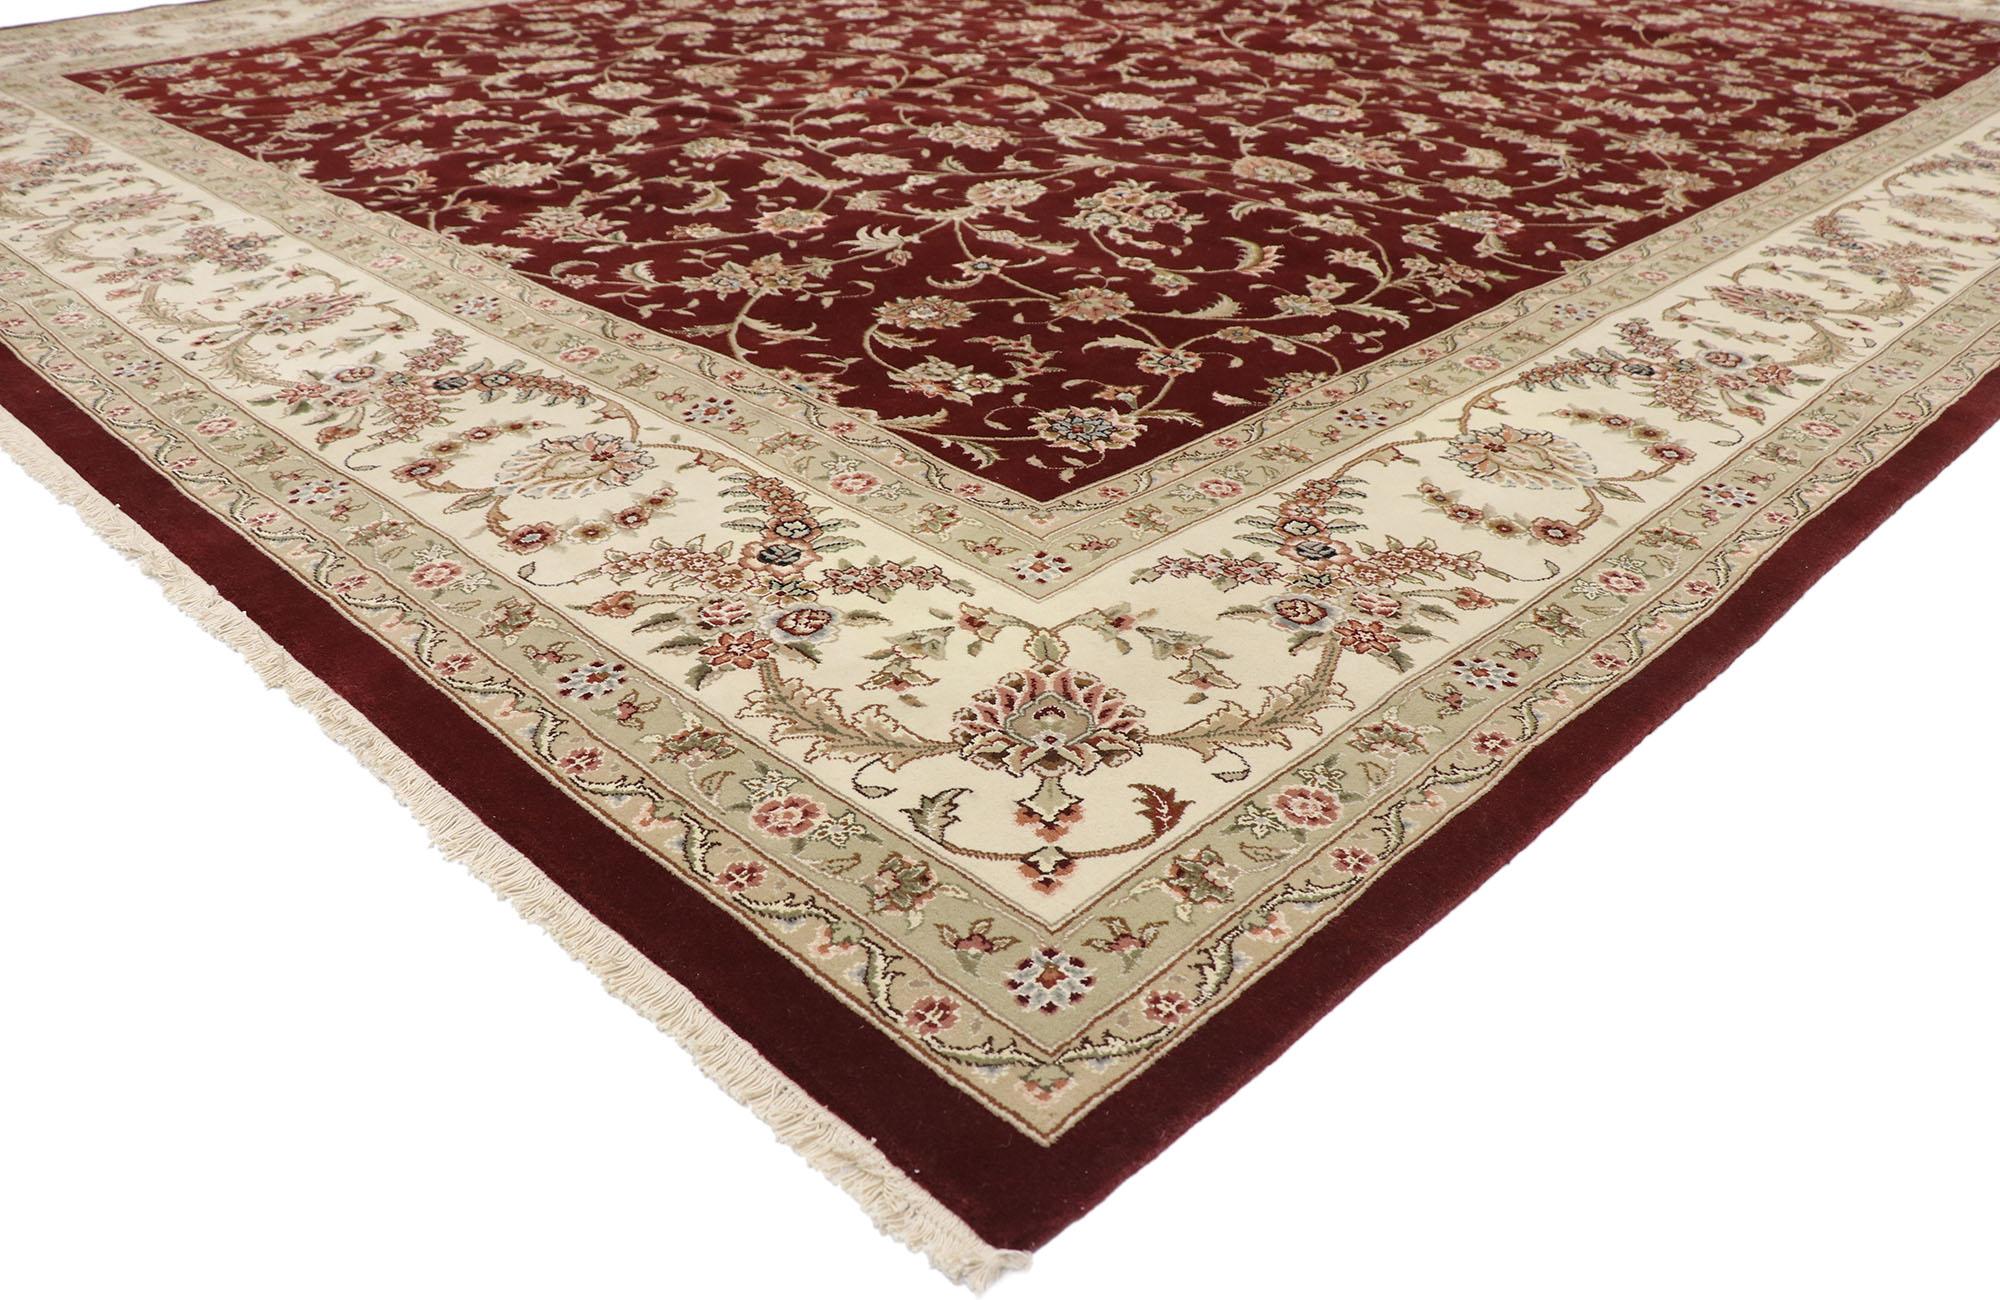 76697, vintage Chinese Persian Tabriz Traditional style rug. This opulent hand-knotted wool Persian-style rug features a Herati pattern of delicate Boteh and stylized flowers in a frenzied garden of dancing arabesque vines on a field of deep